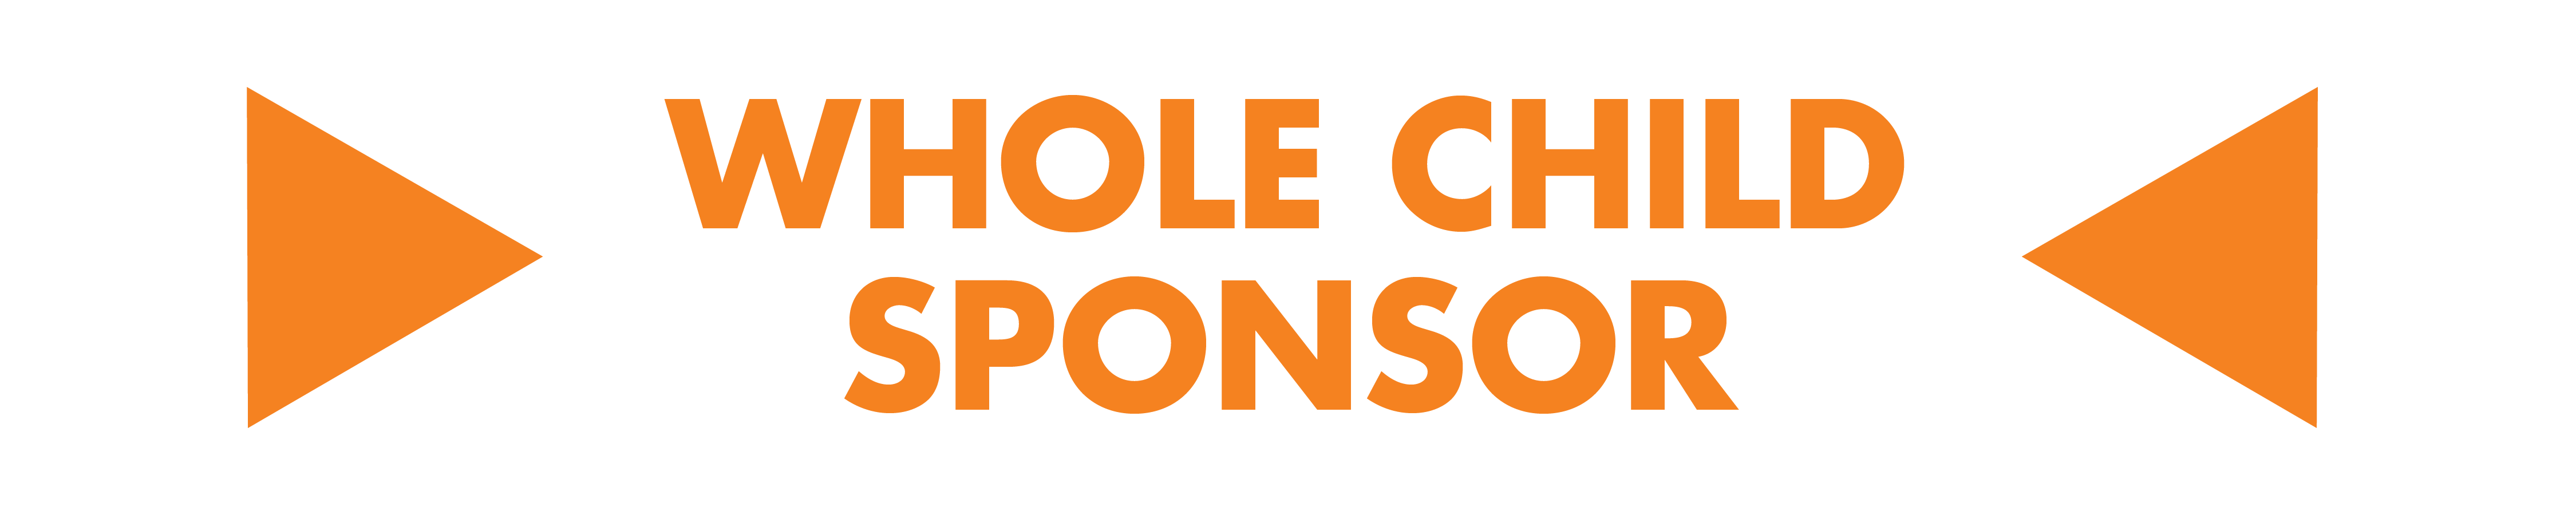 Q-give whole child sponsorship labels.png